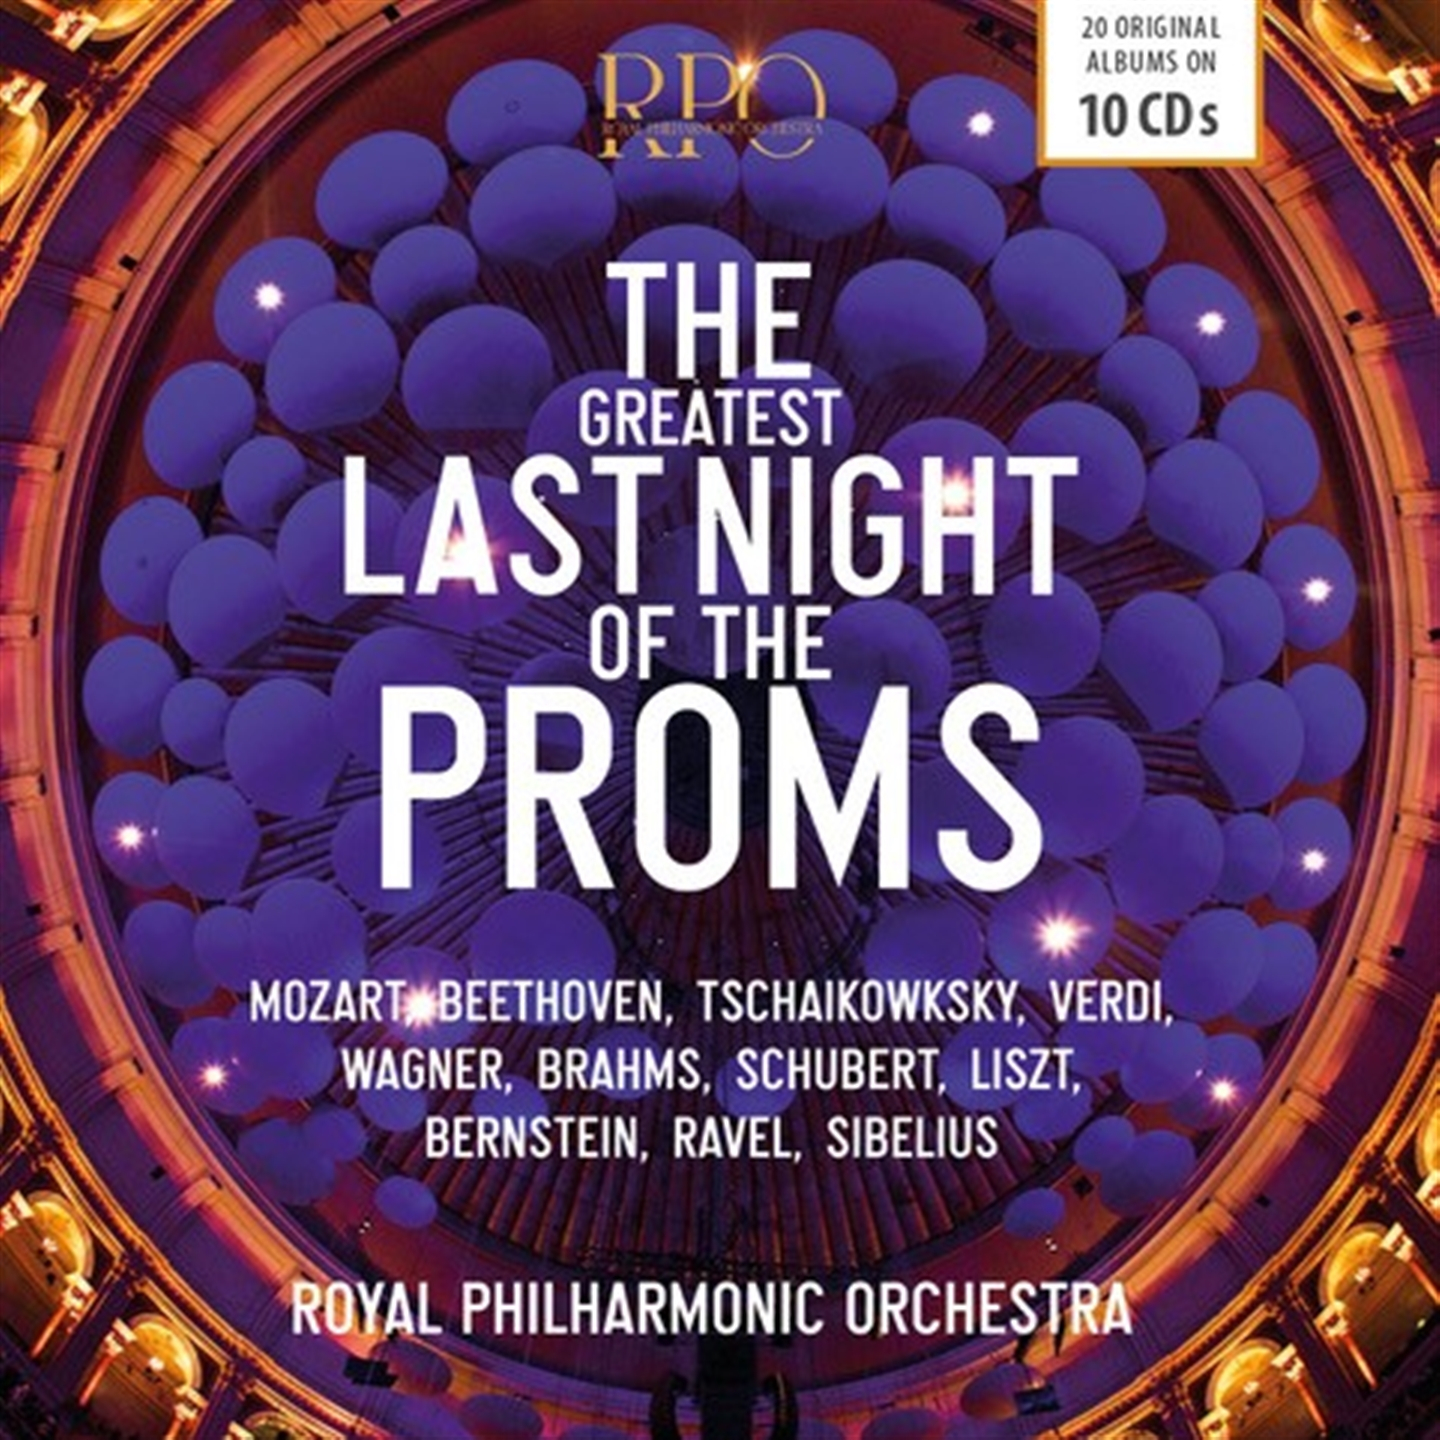 Royal Philarmonic Orchestra - The Greatest Last Night Of The Proms - Picture 1 of 1